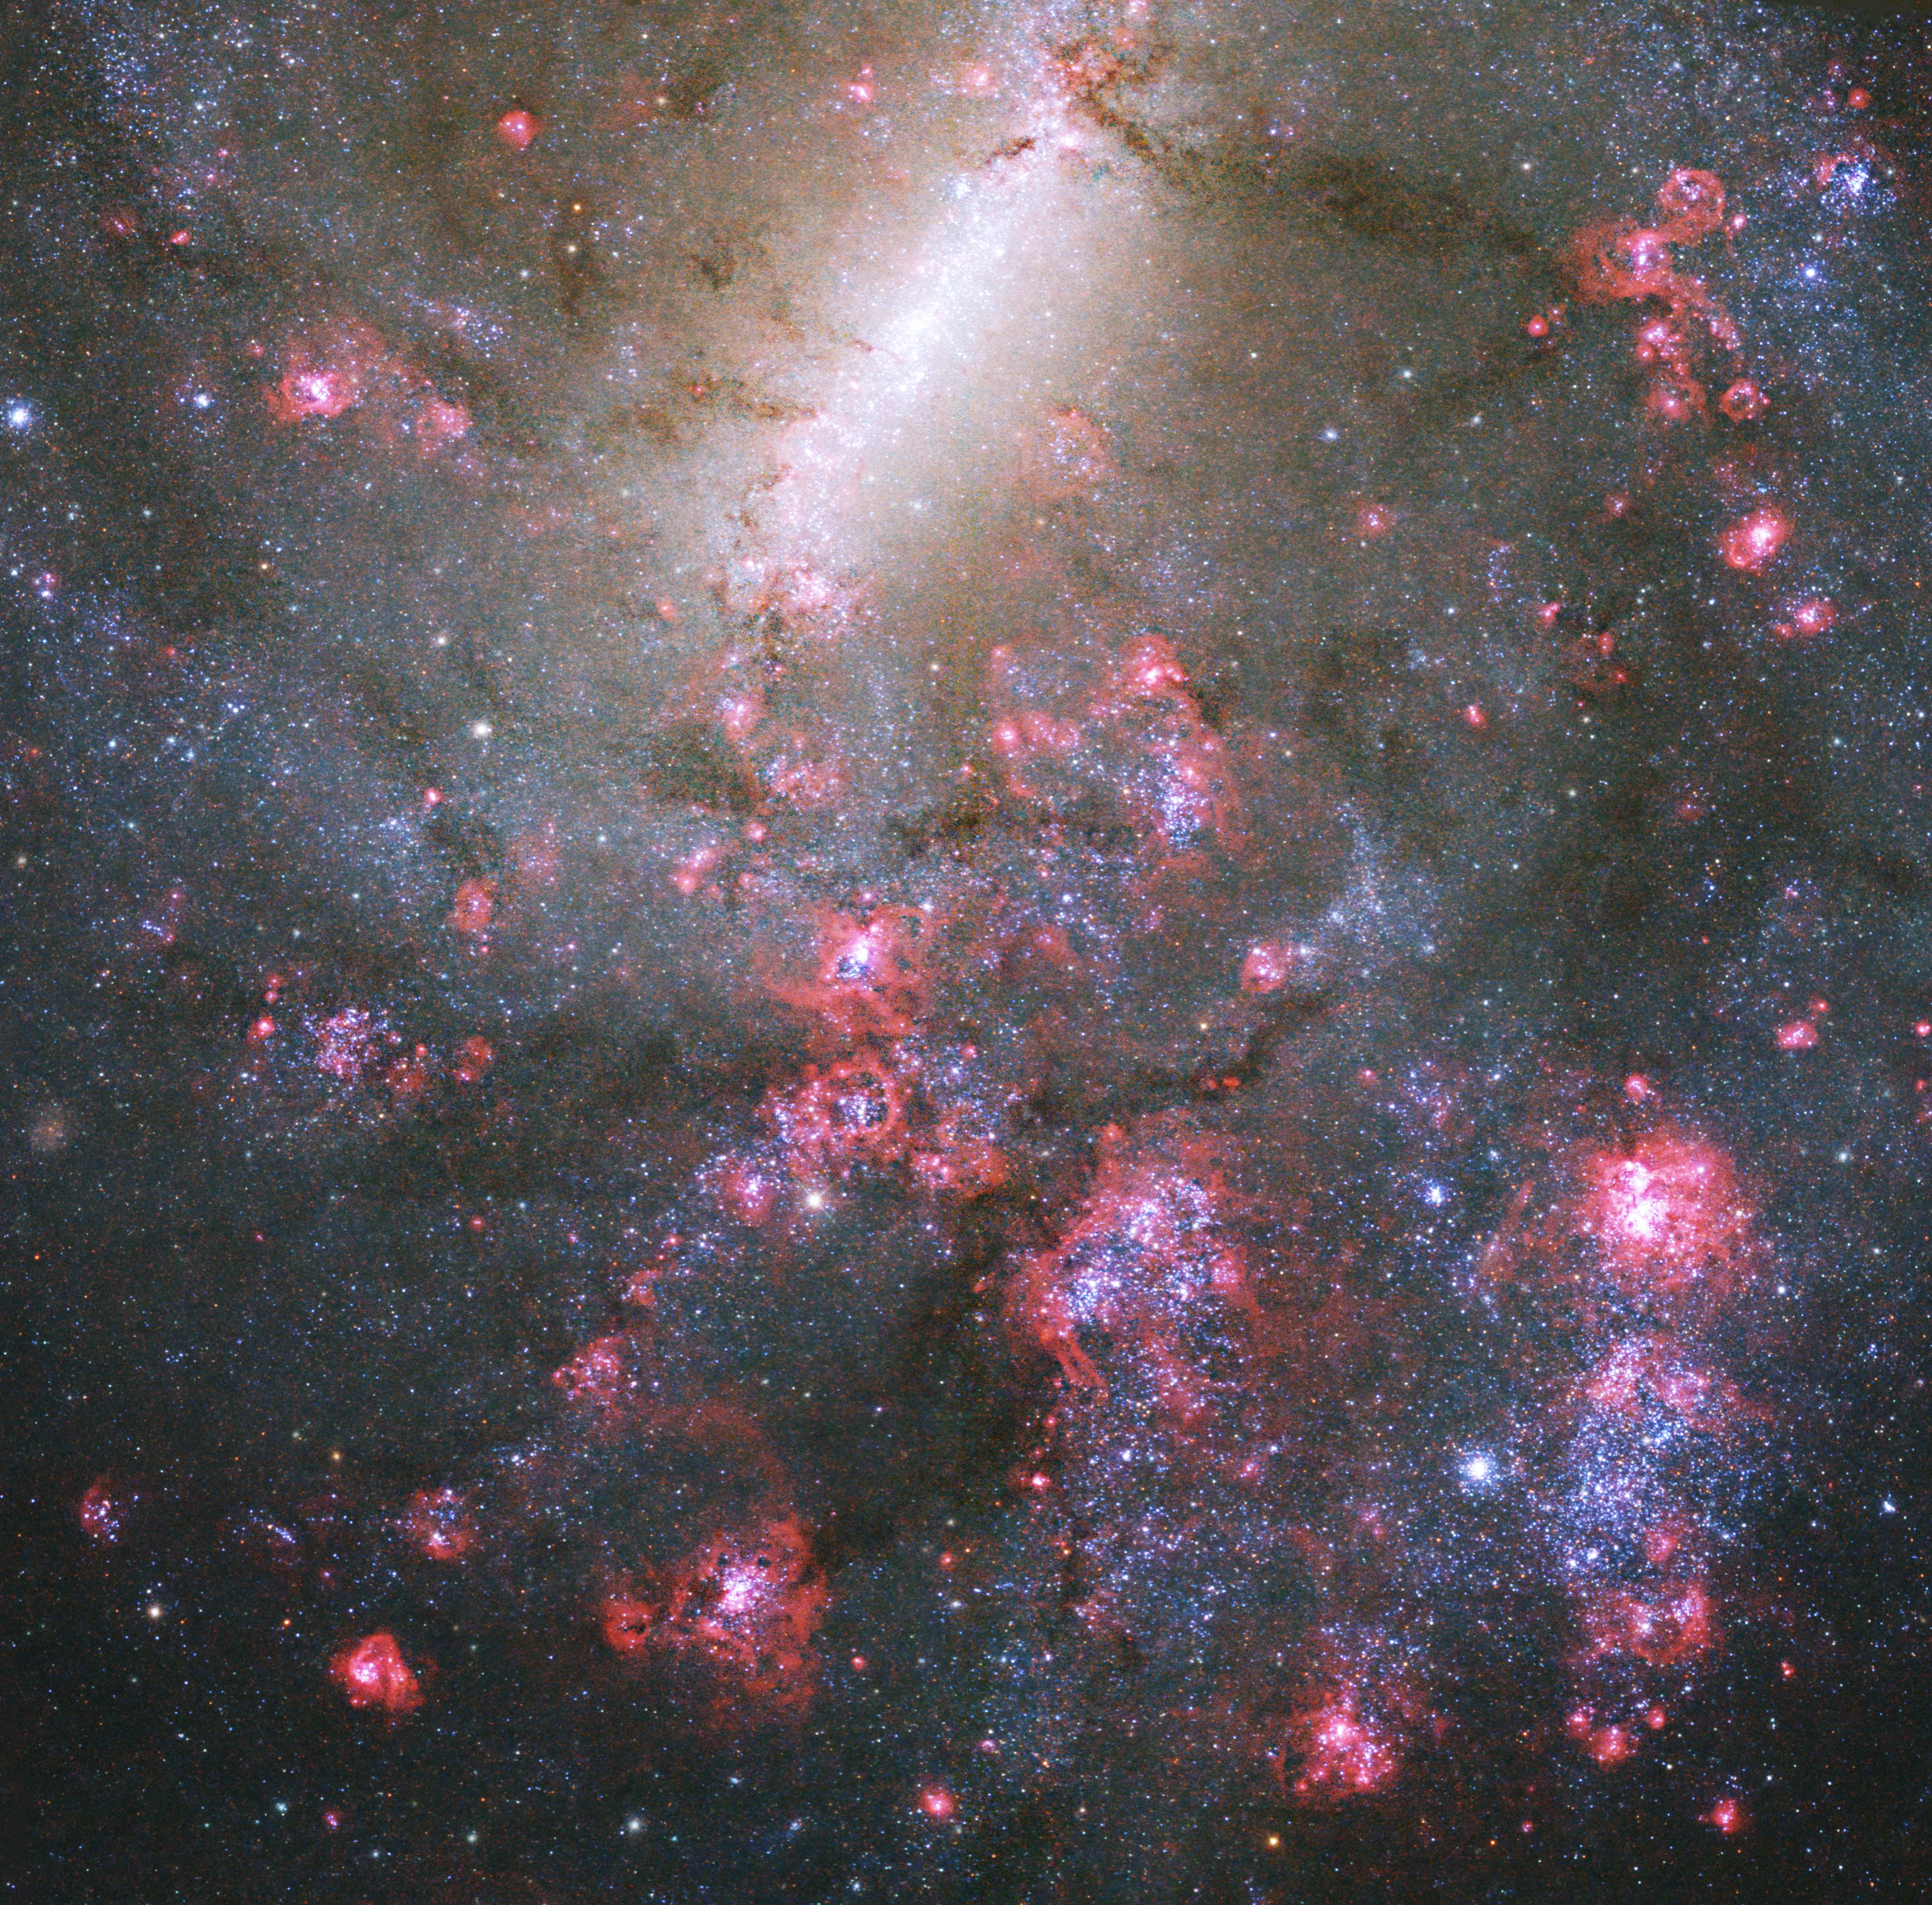 Splotches of bright-pink and blue-white fill the lower half of the image. A bright bar of white stars extends downward from top-center toward the left. Random areas of dusty clouds form dark streams against the bright backdrop.